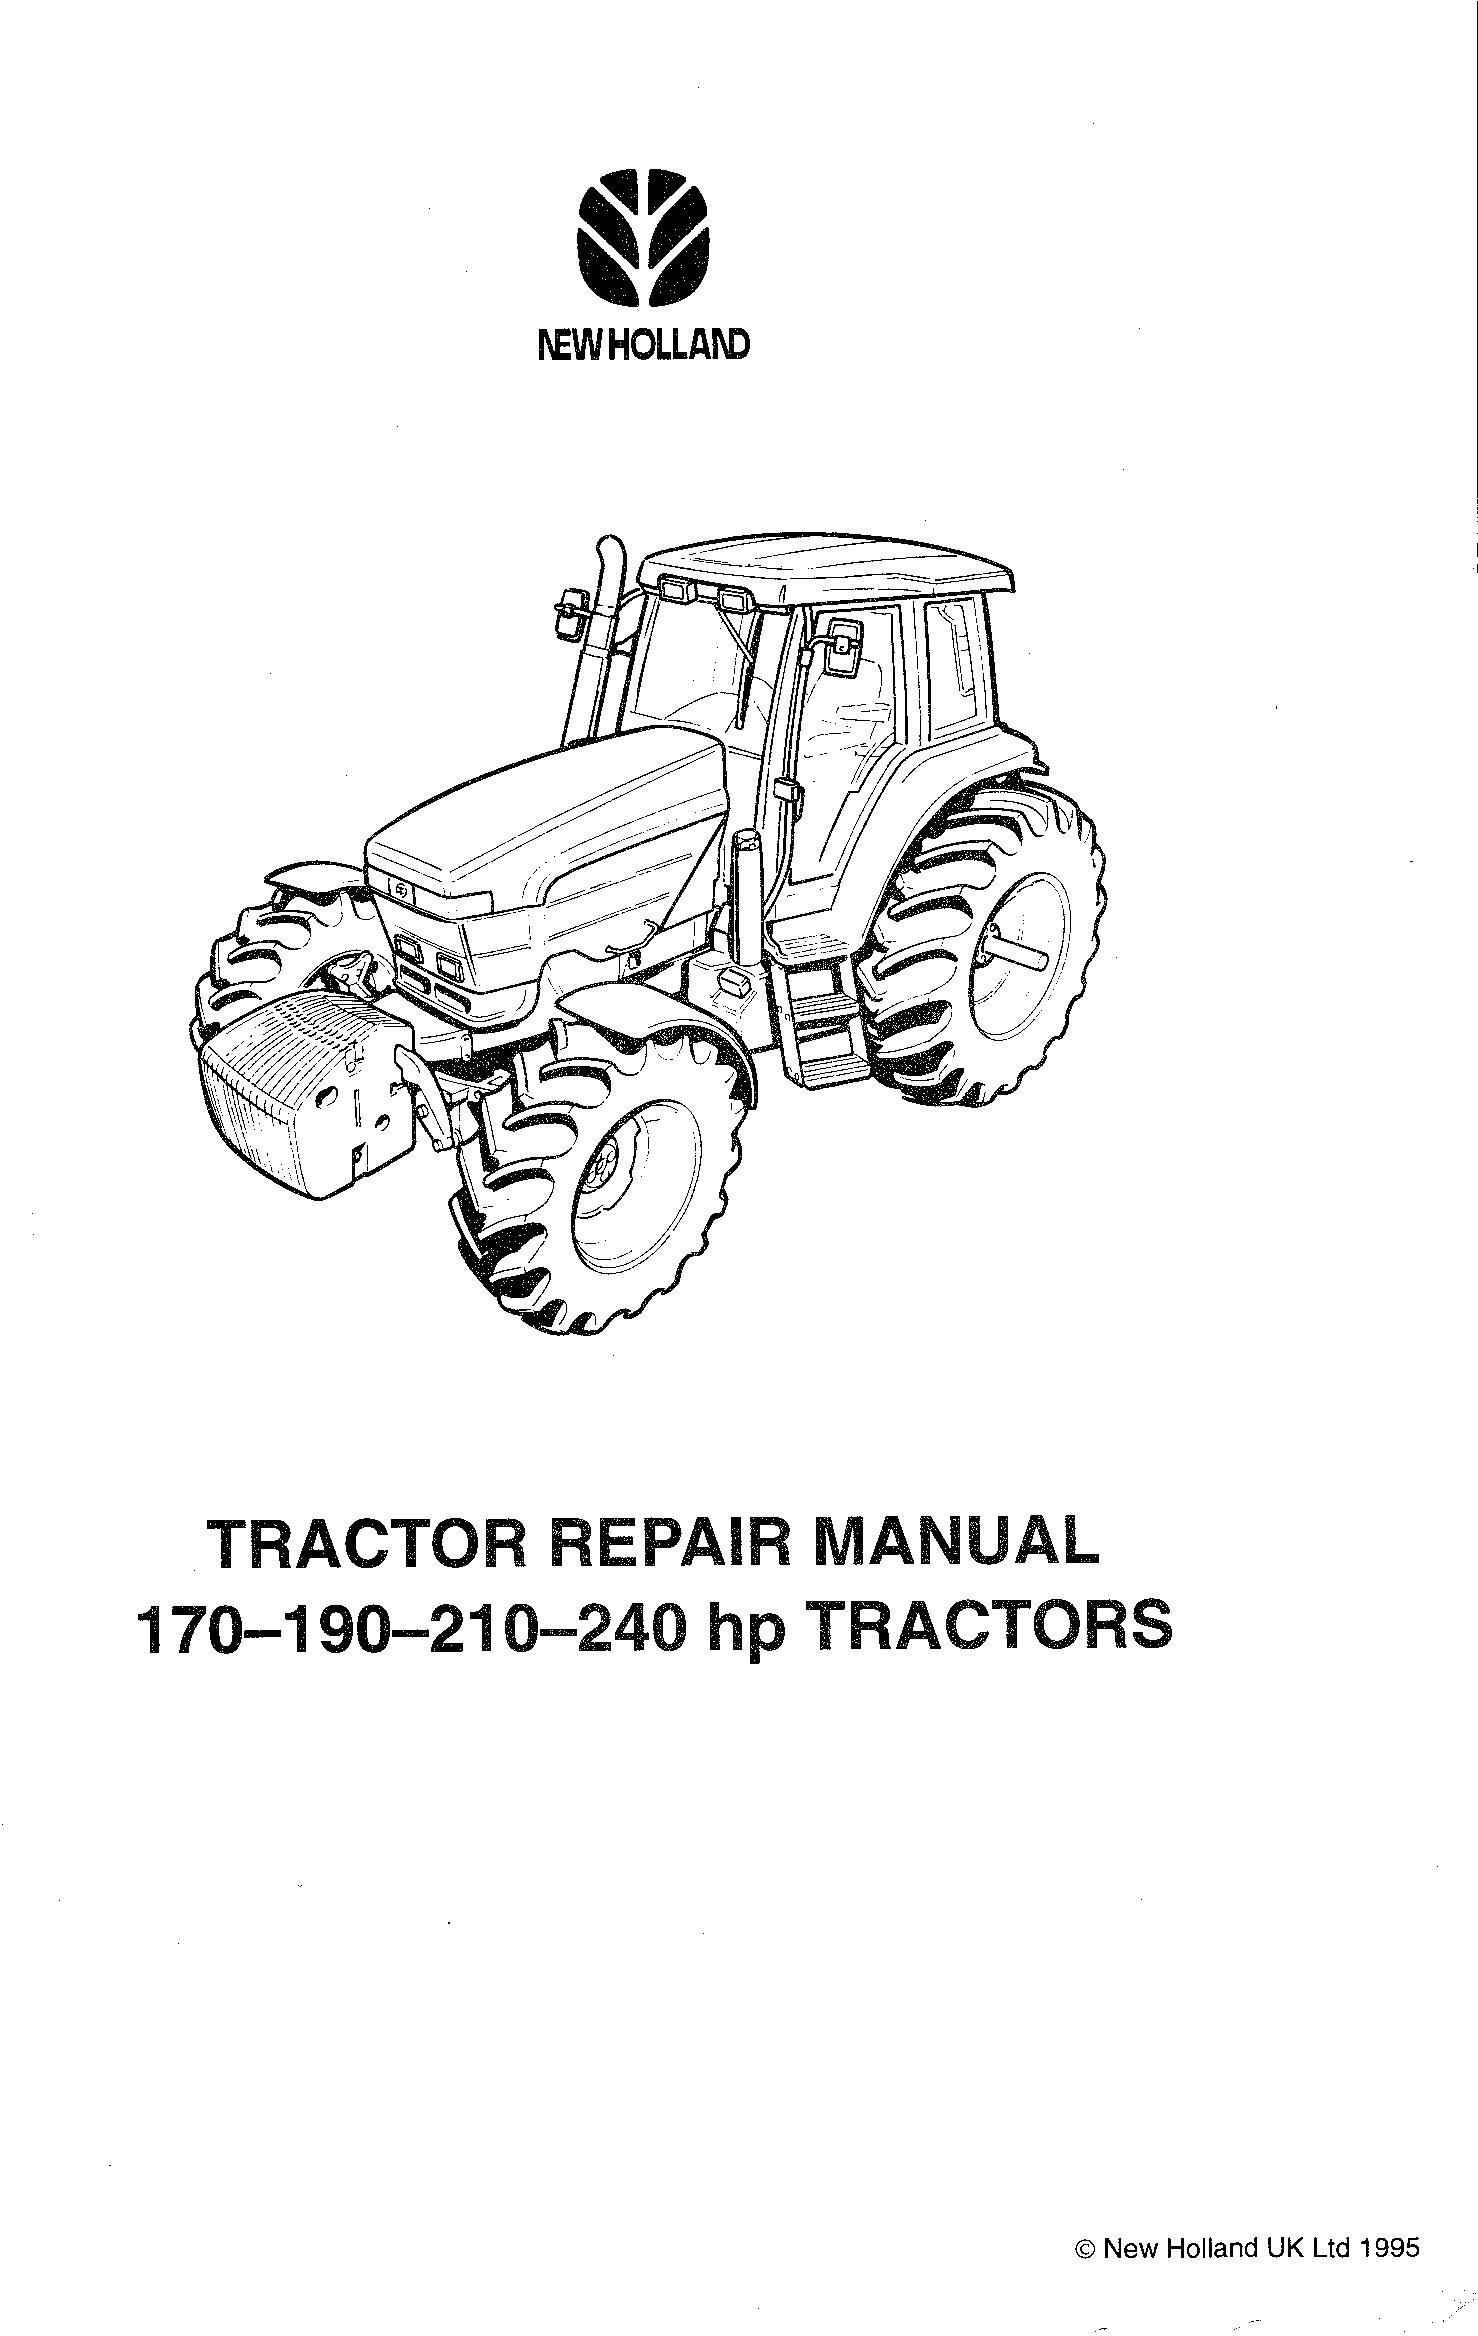 New Holland G170, G190, G210, G240 HP Tractors Service Manual